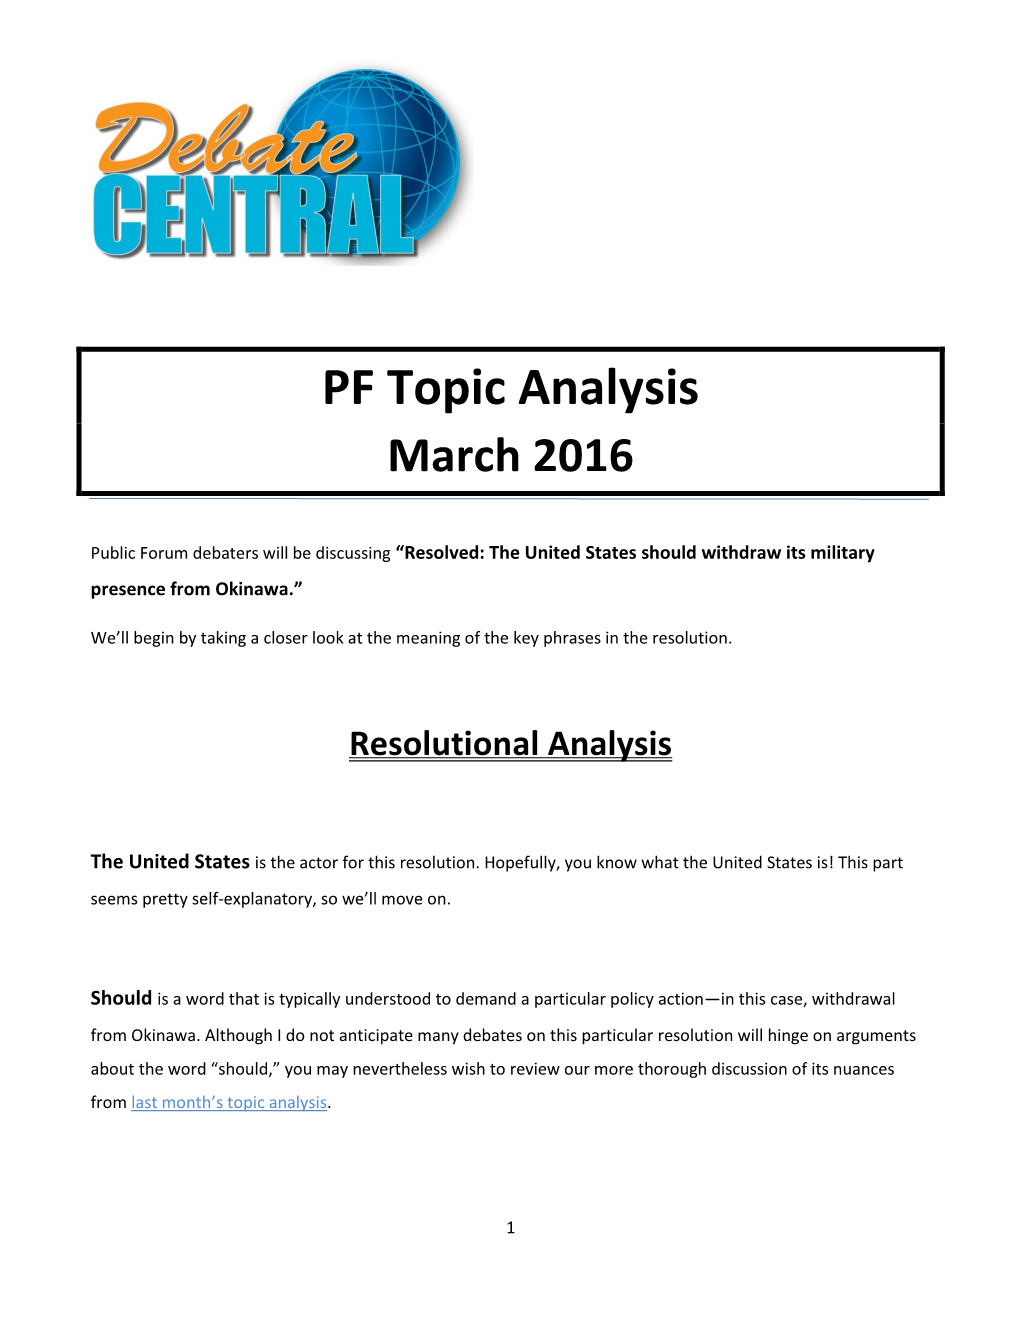 PF Topic Analysis March 2016